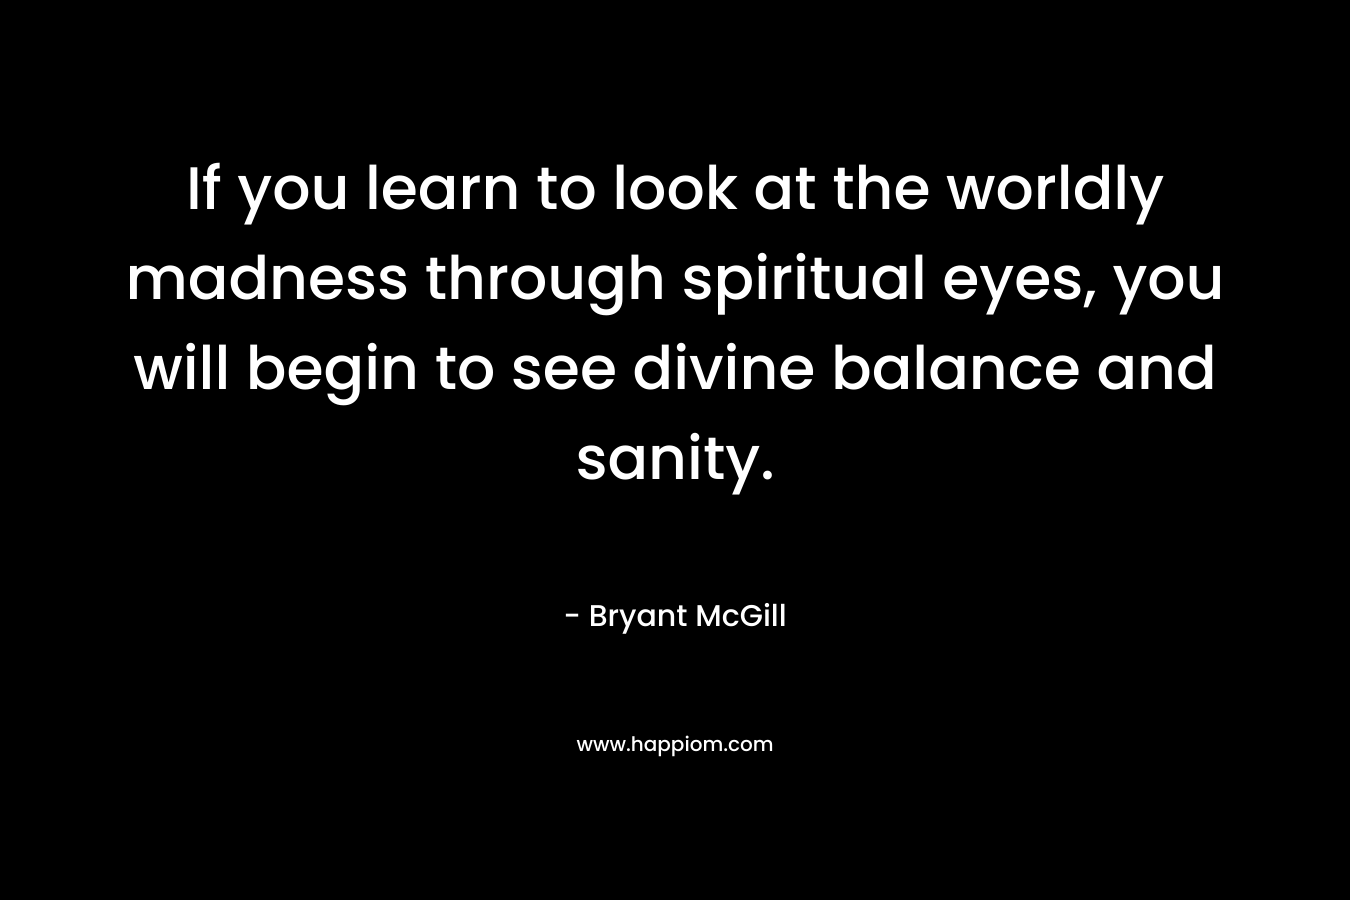 If you learn to look at the worldly madness through spiritual eyes, you will begin to see divine balance and sanity.